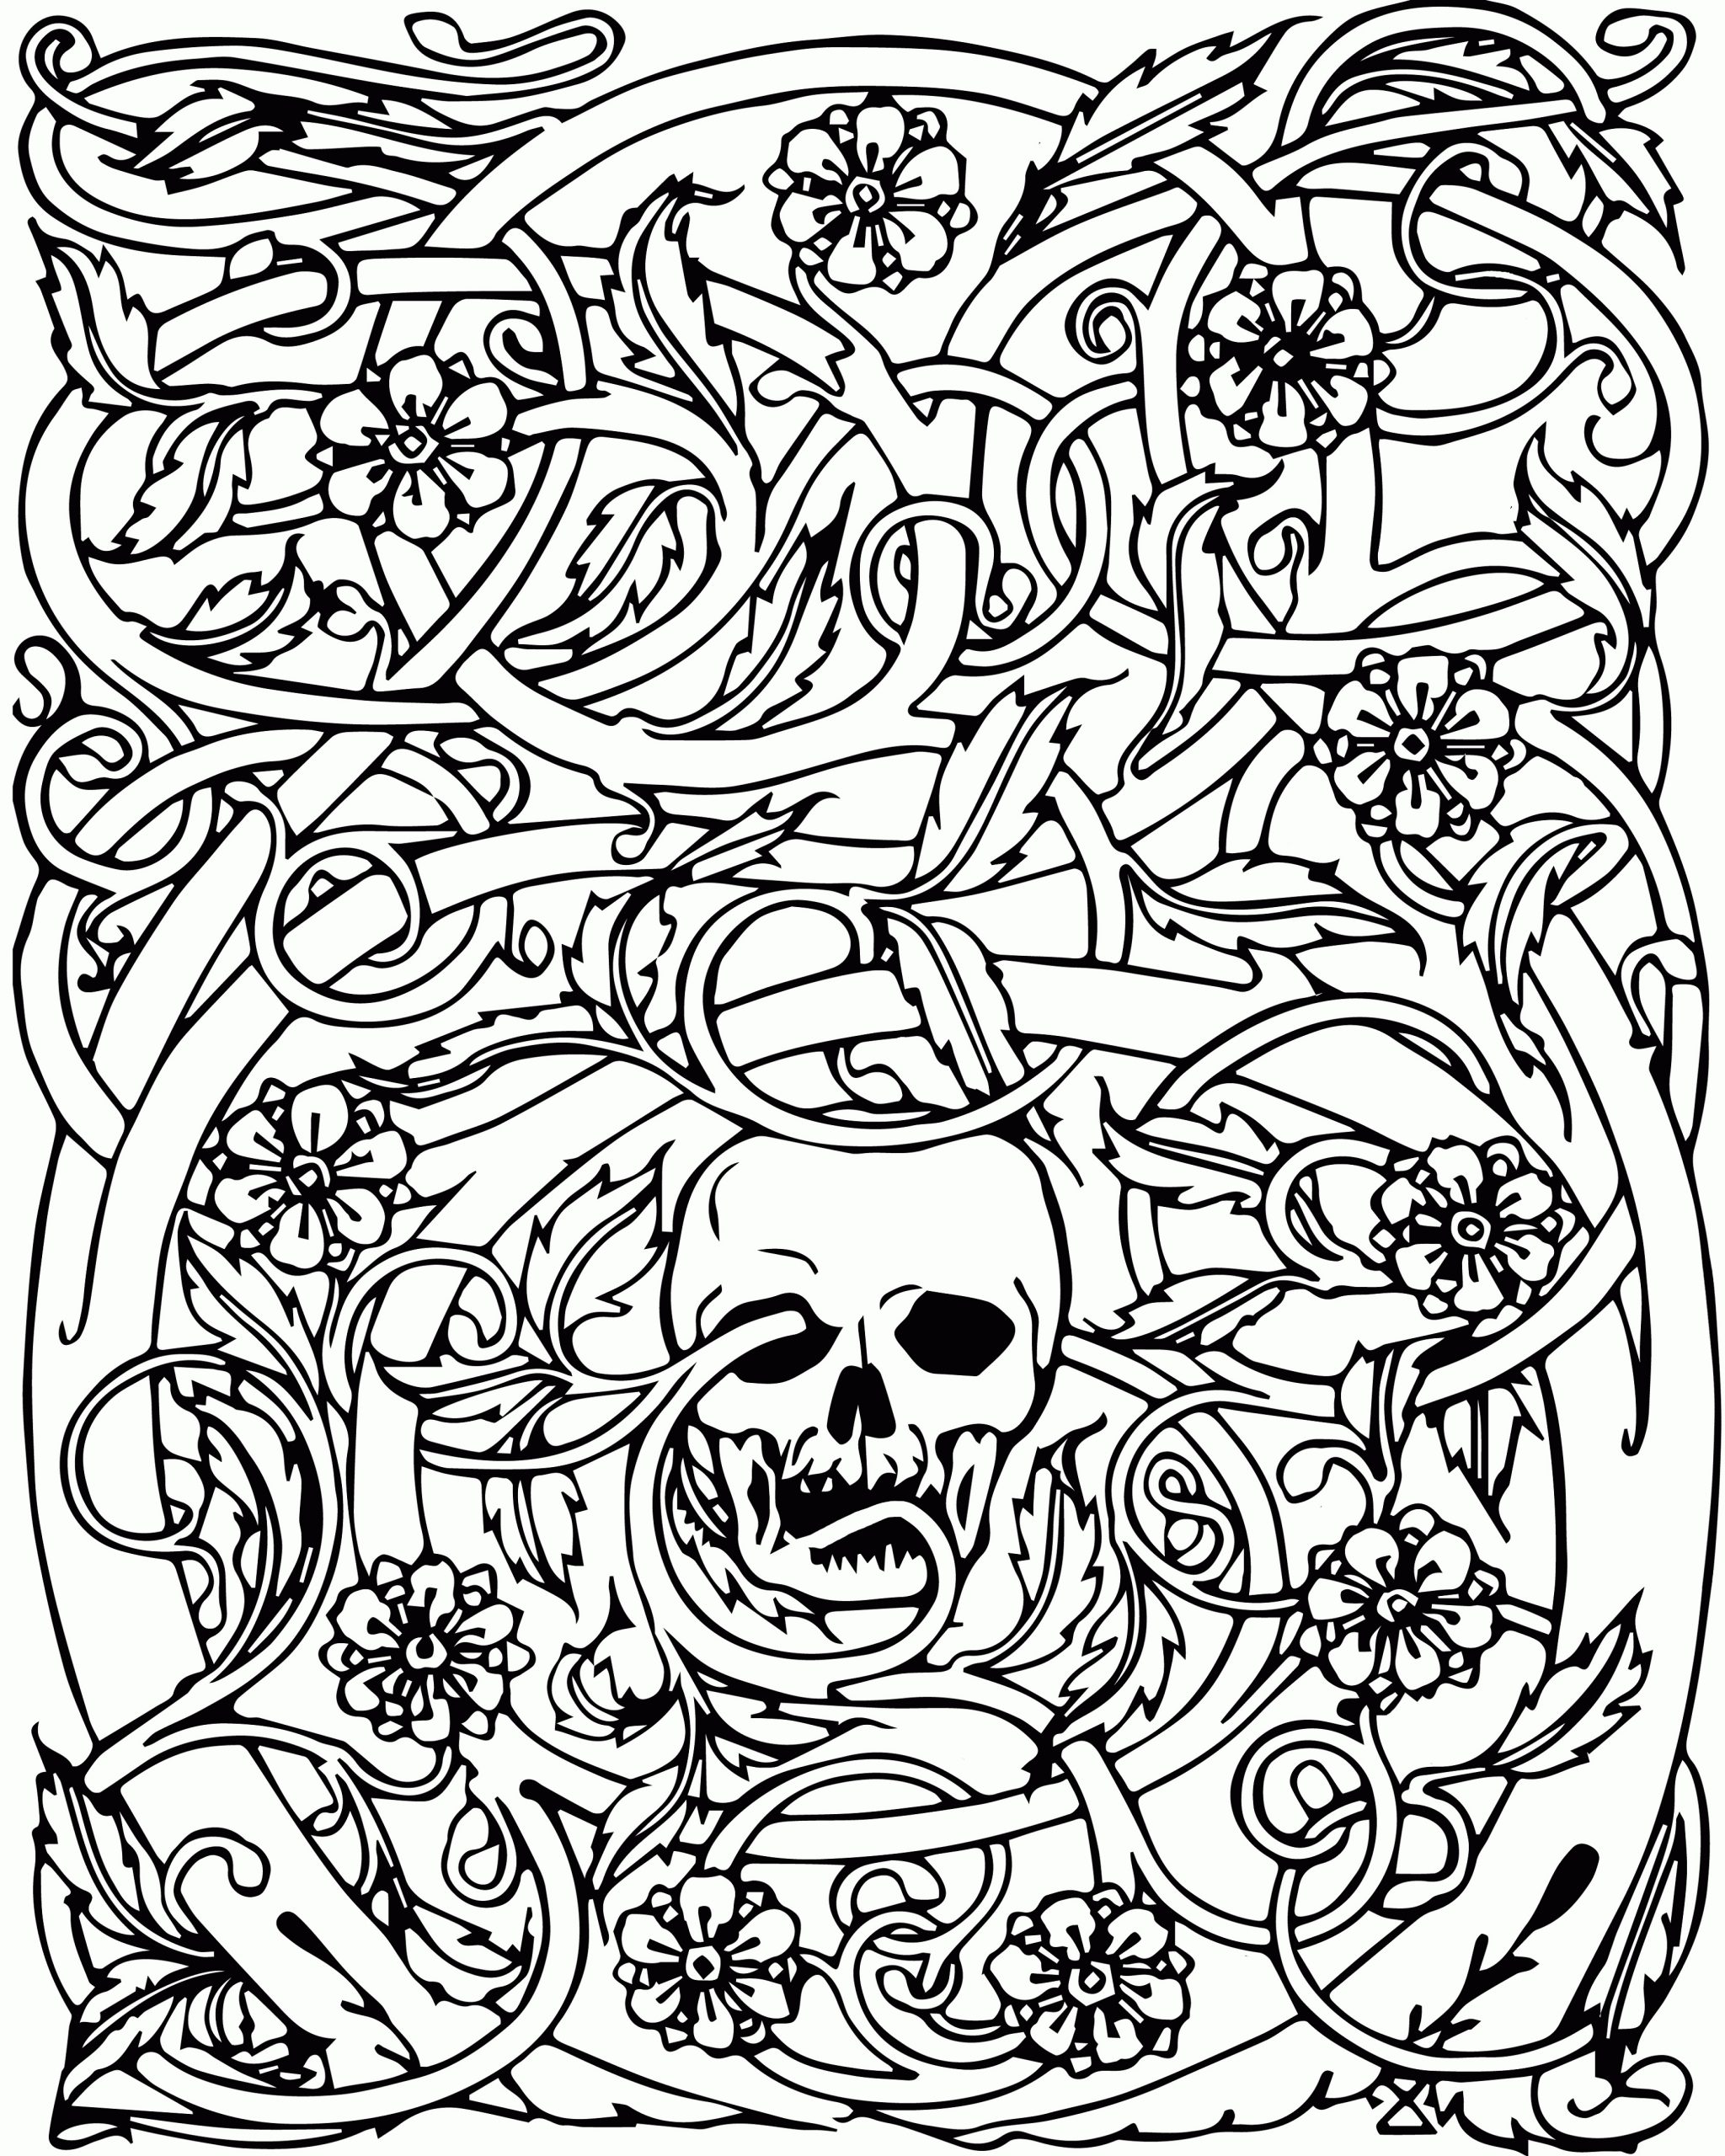 Awesome Coloring Pages Cool Skull